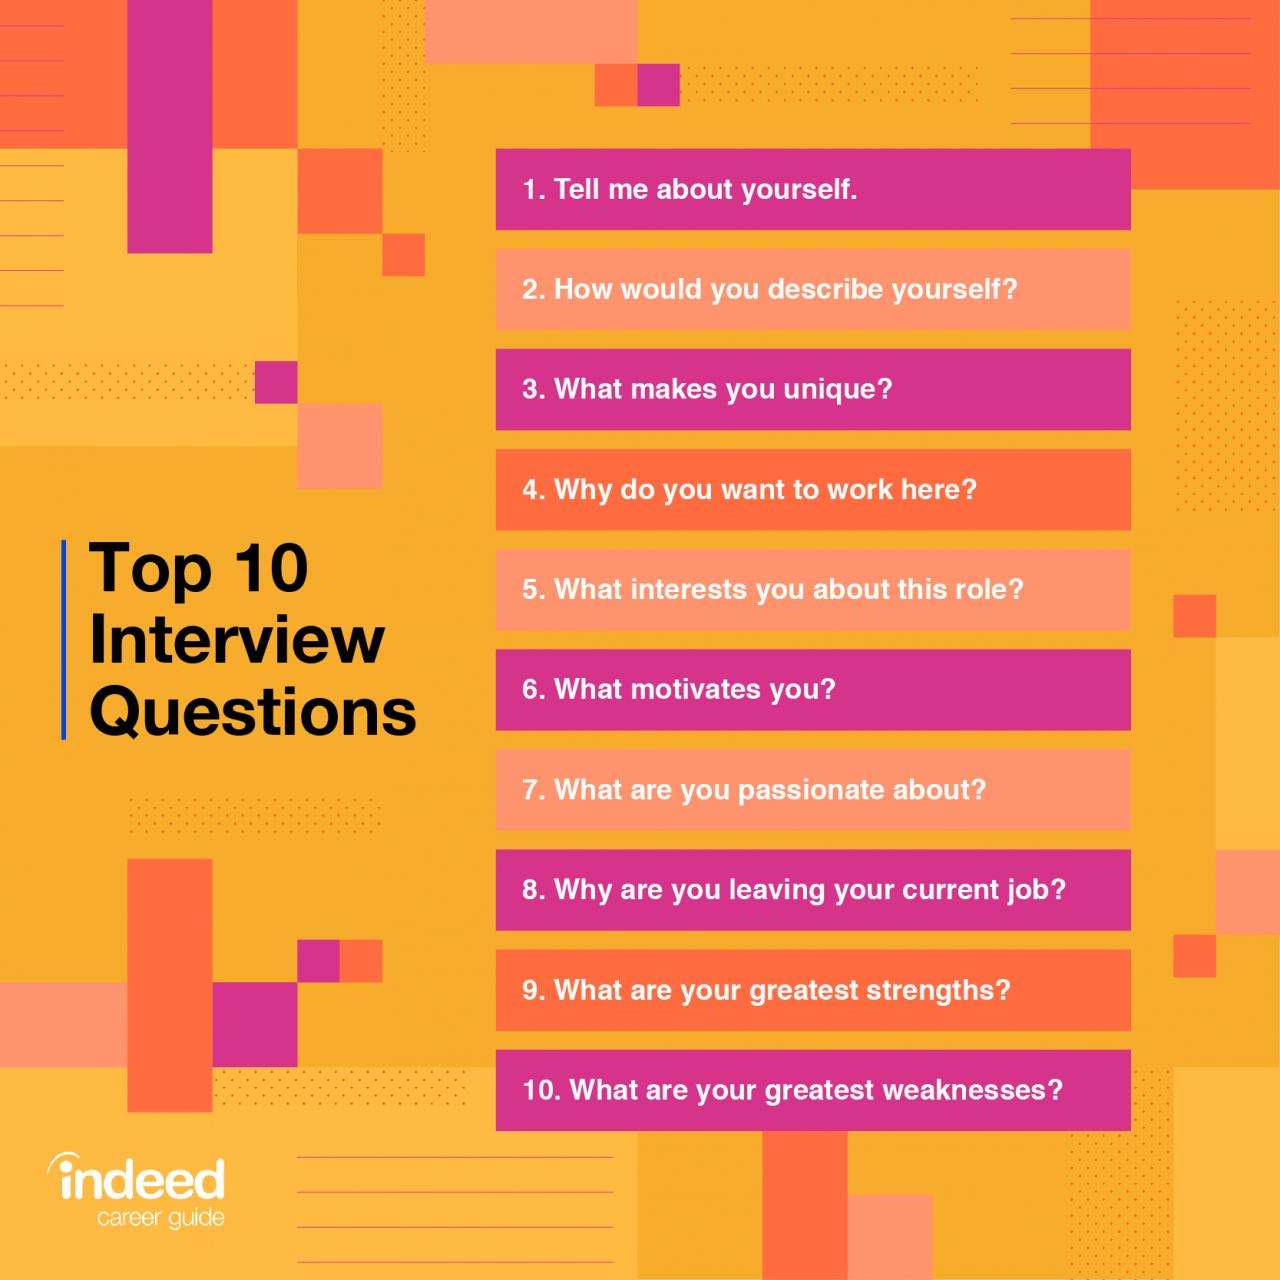 Common questions for an interview